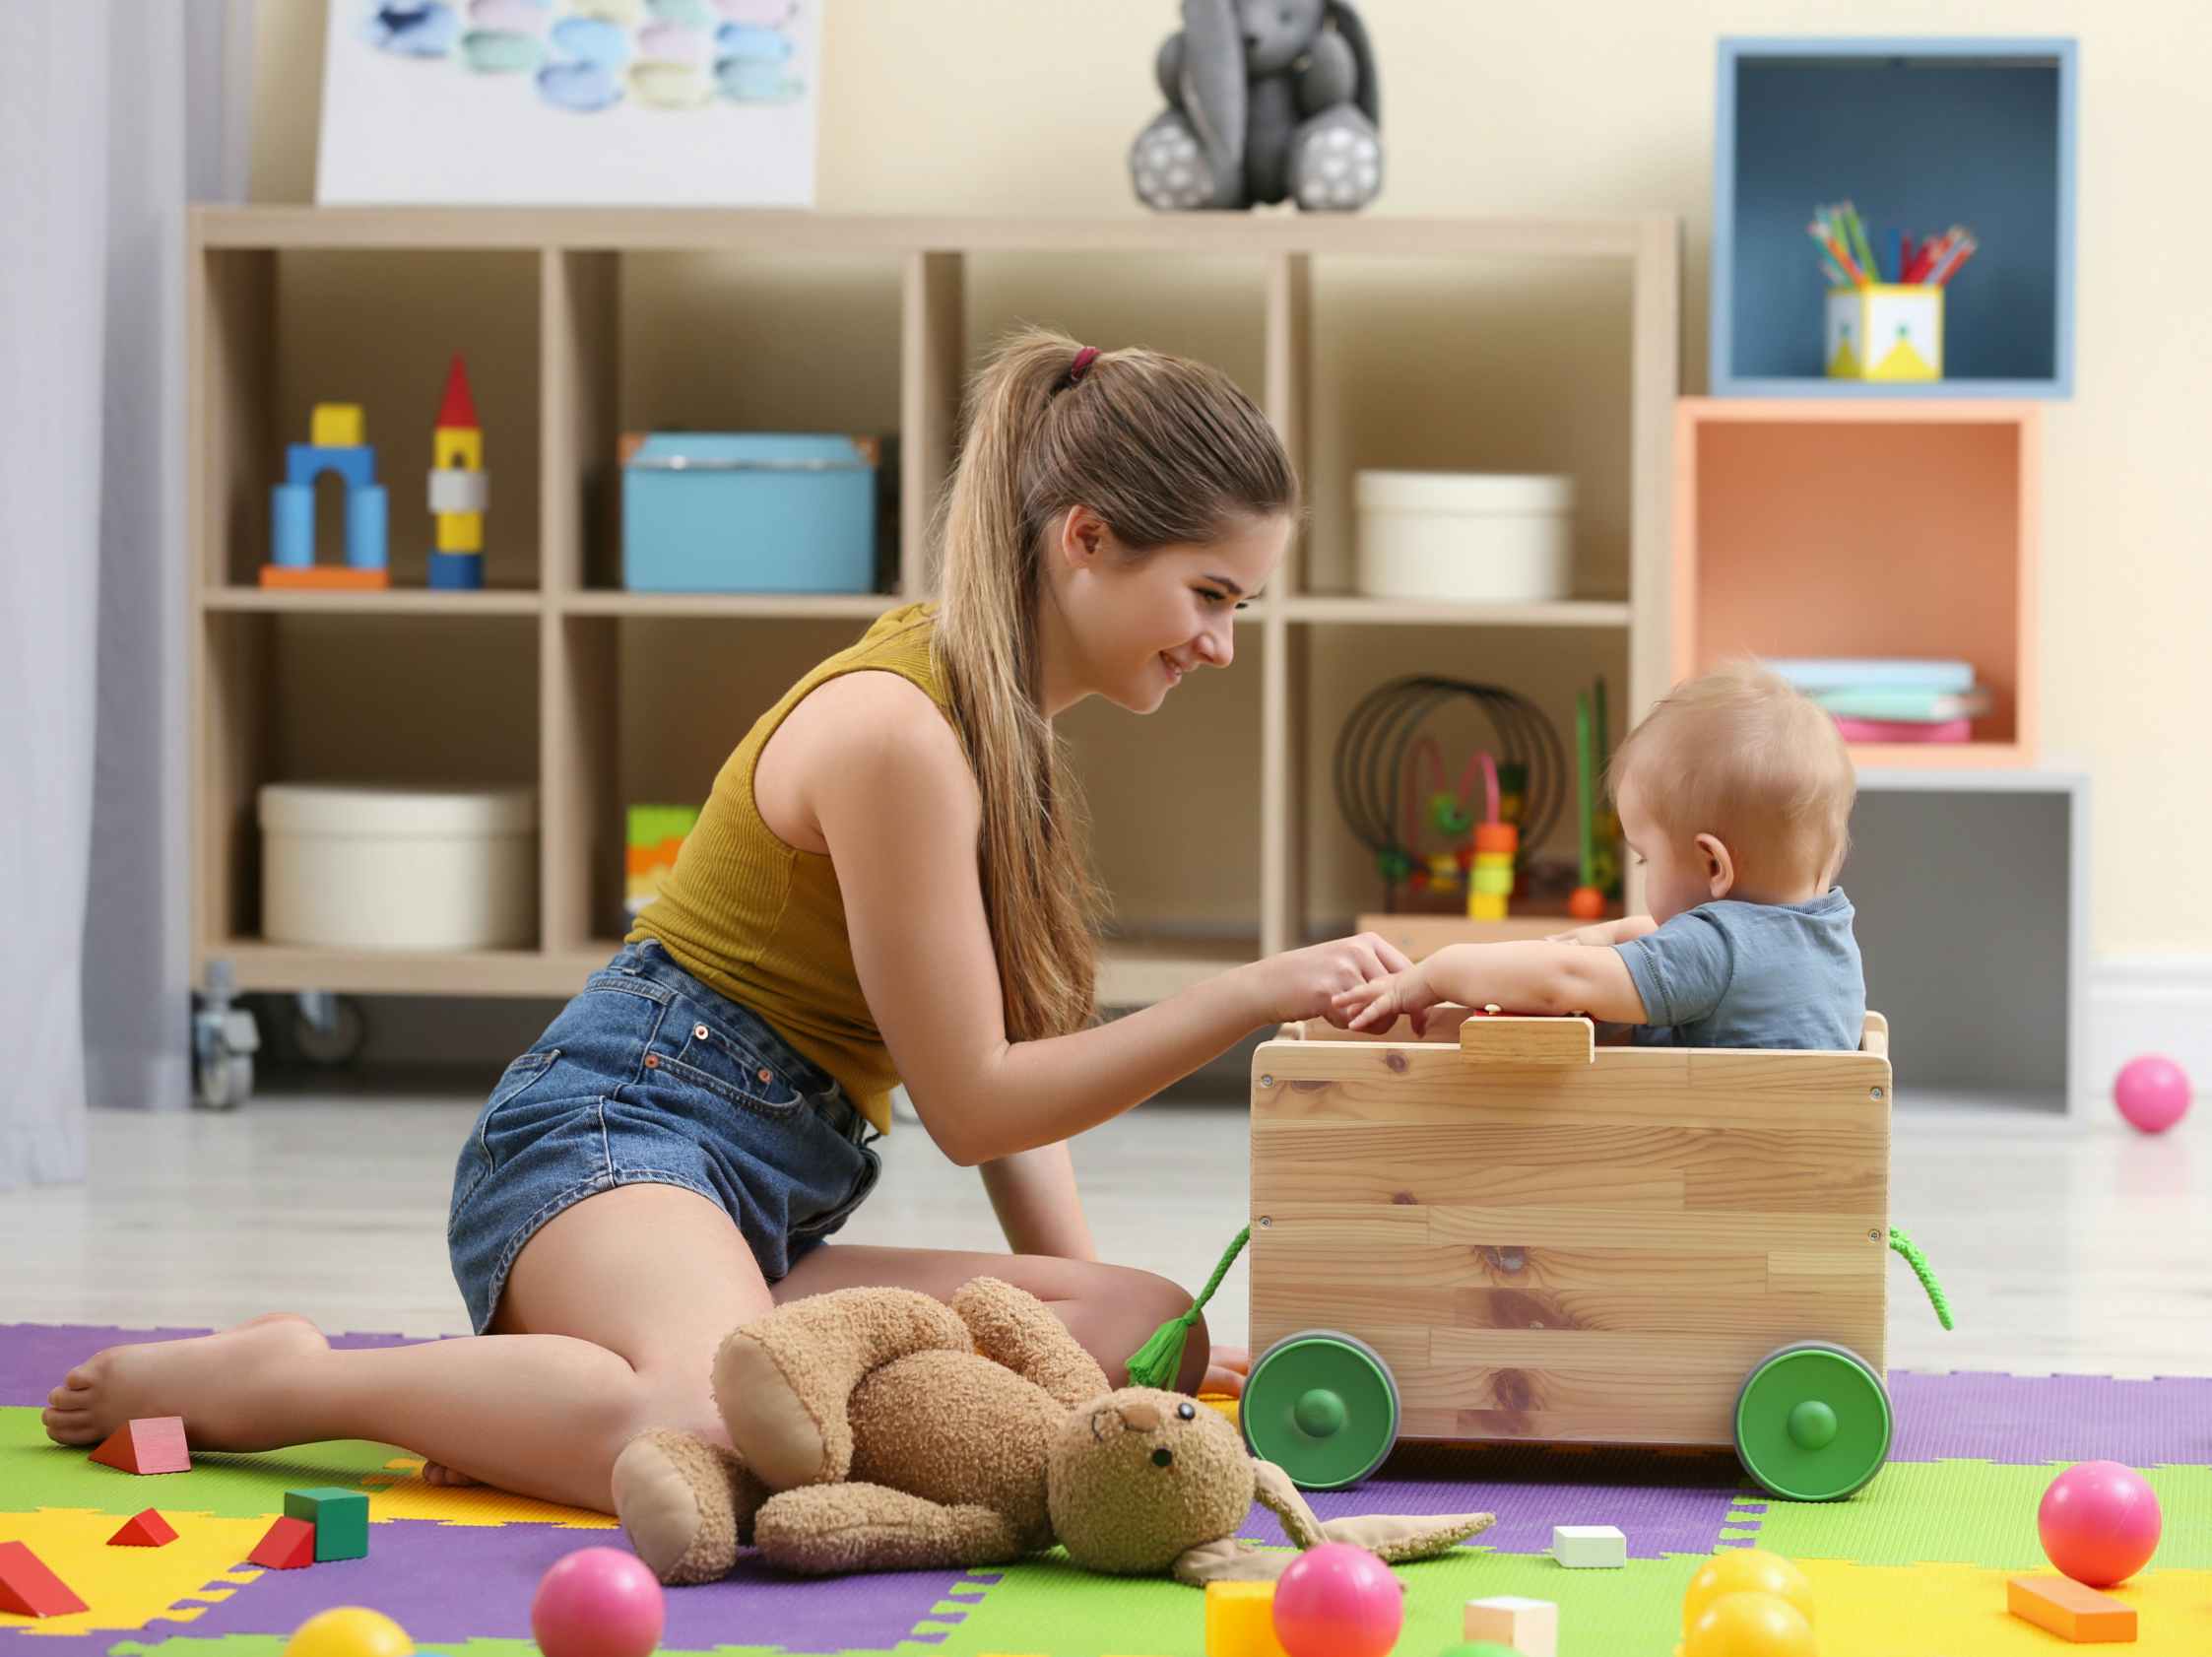 teenage girl child care worker playing with baby in playroom